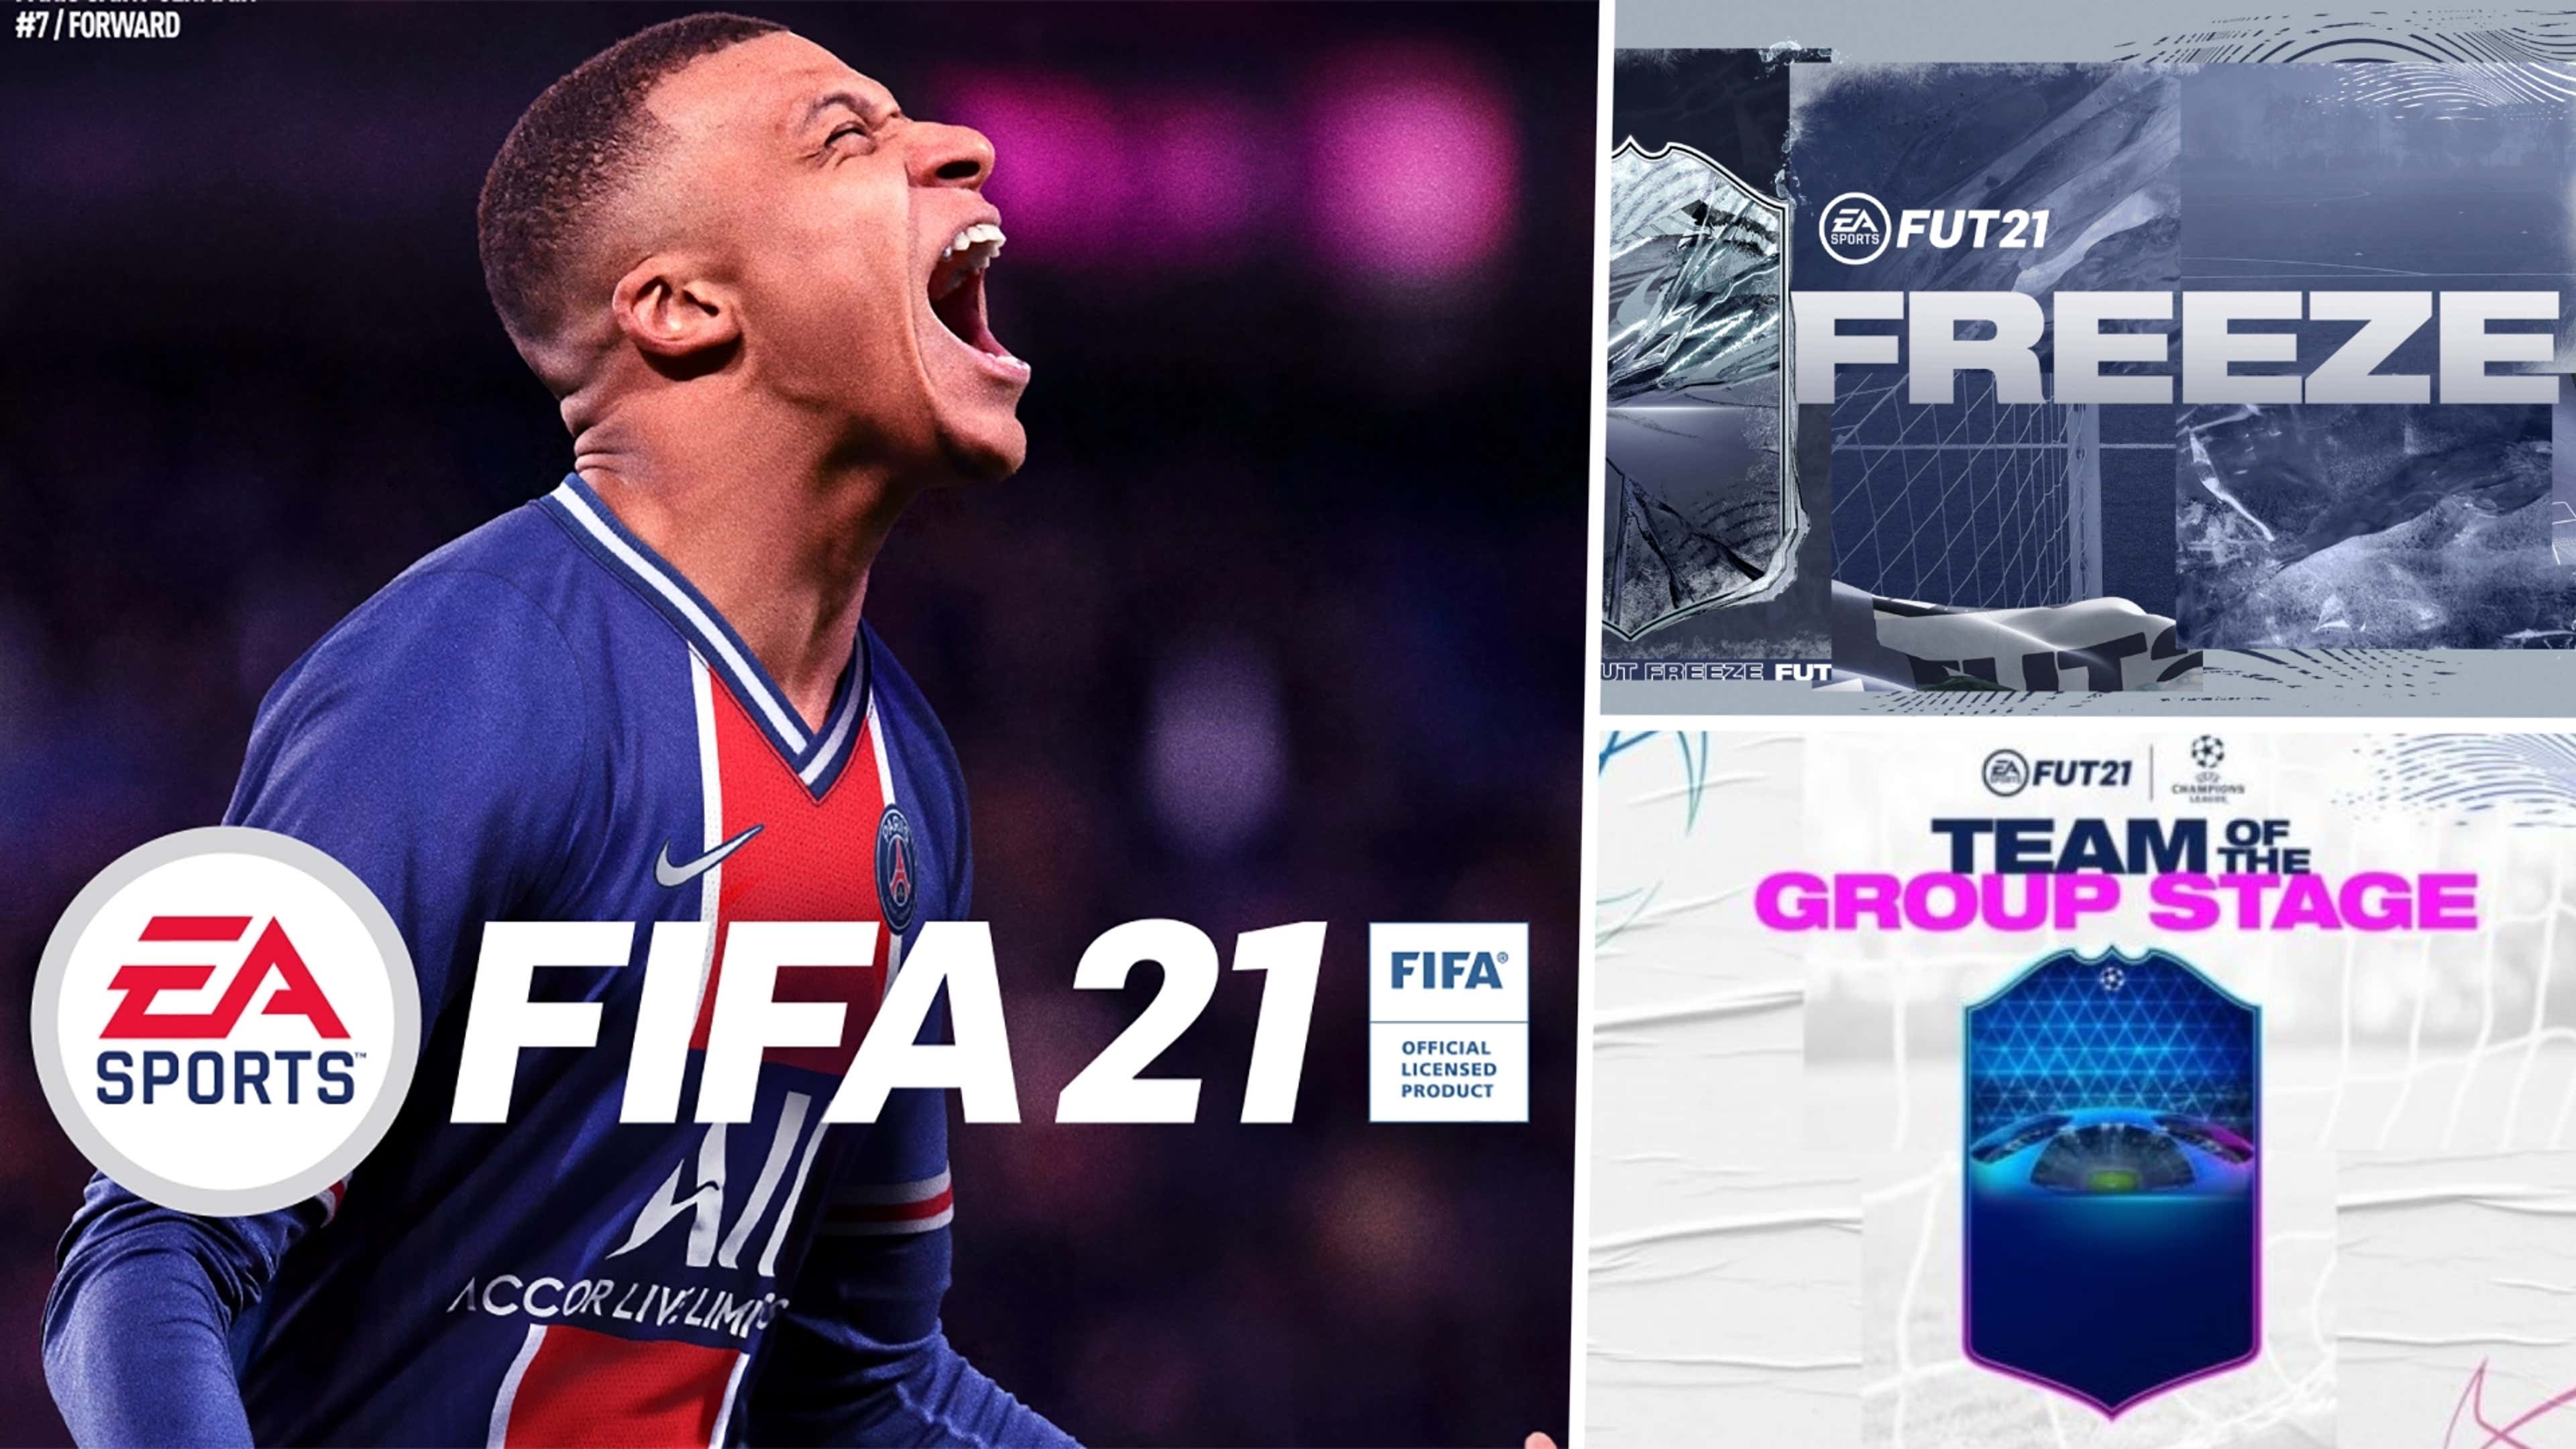 FIFA 21 Web App: Release Date, Details and Tutorial